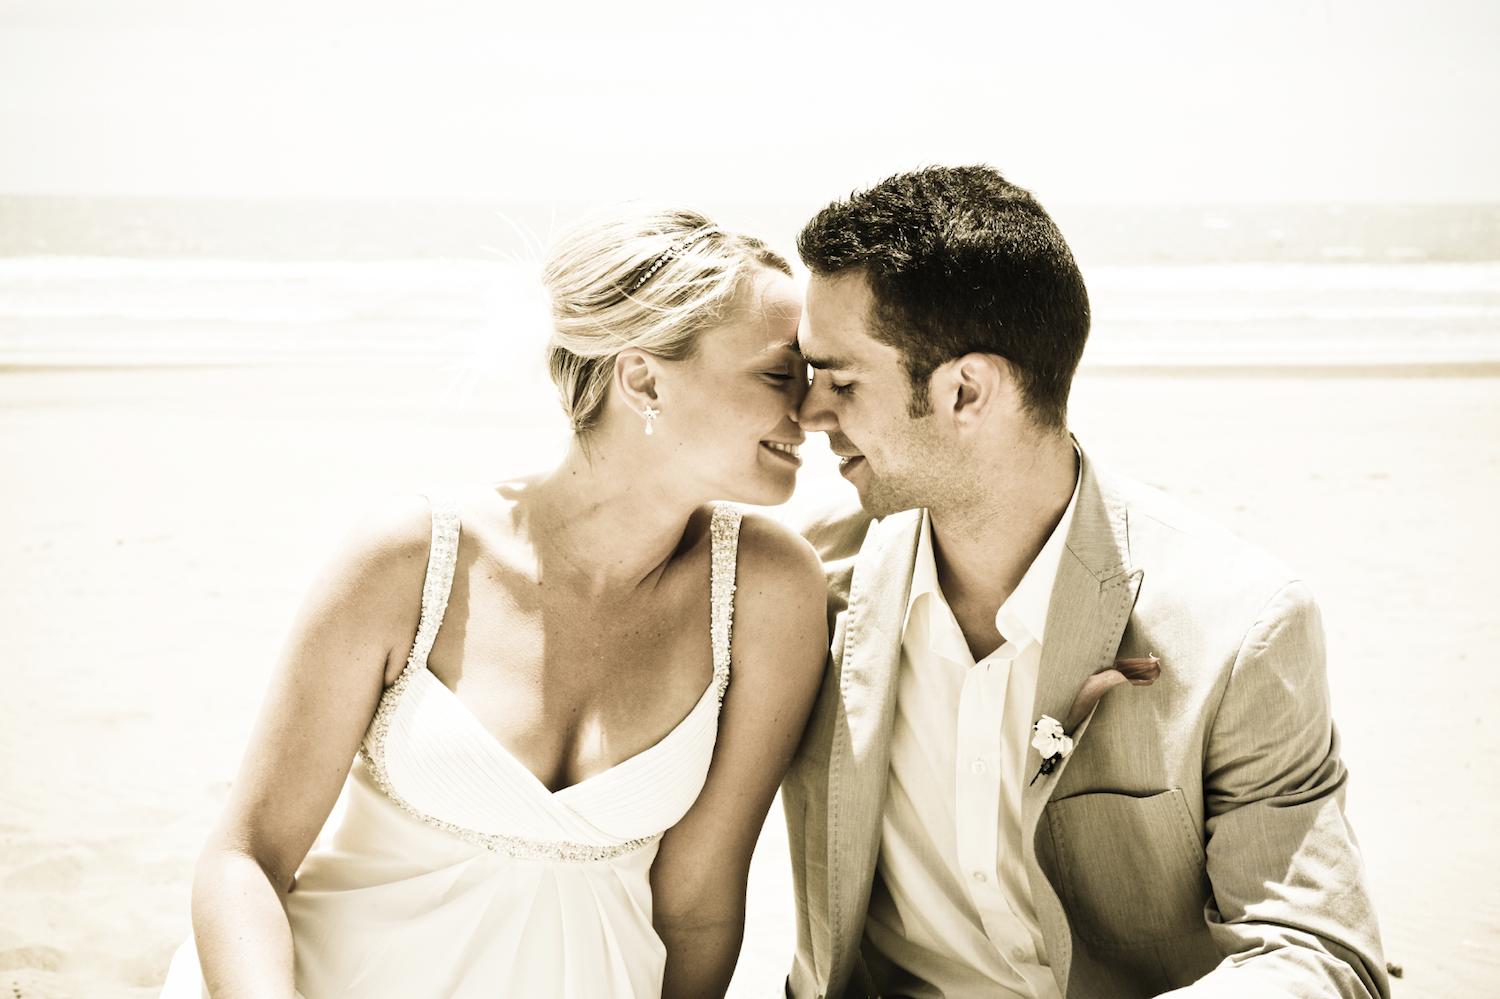 Here is your chance to start your wedding planning with an all-access book to the best venues, wedding photographers, reception sites and more that the area has to offer. Written by the area’s most sought after wedding planner, Cocktails & Details, you’ll have tips, must-know information and guides on having the most beautiful wedding in St. Simons and Jekyll Island.